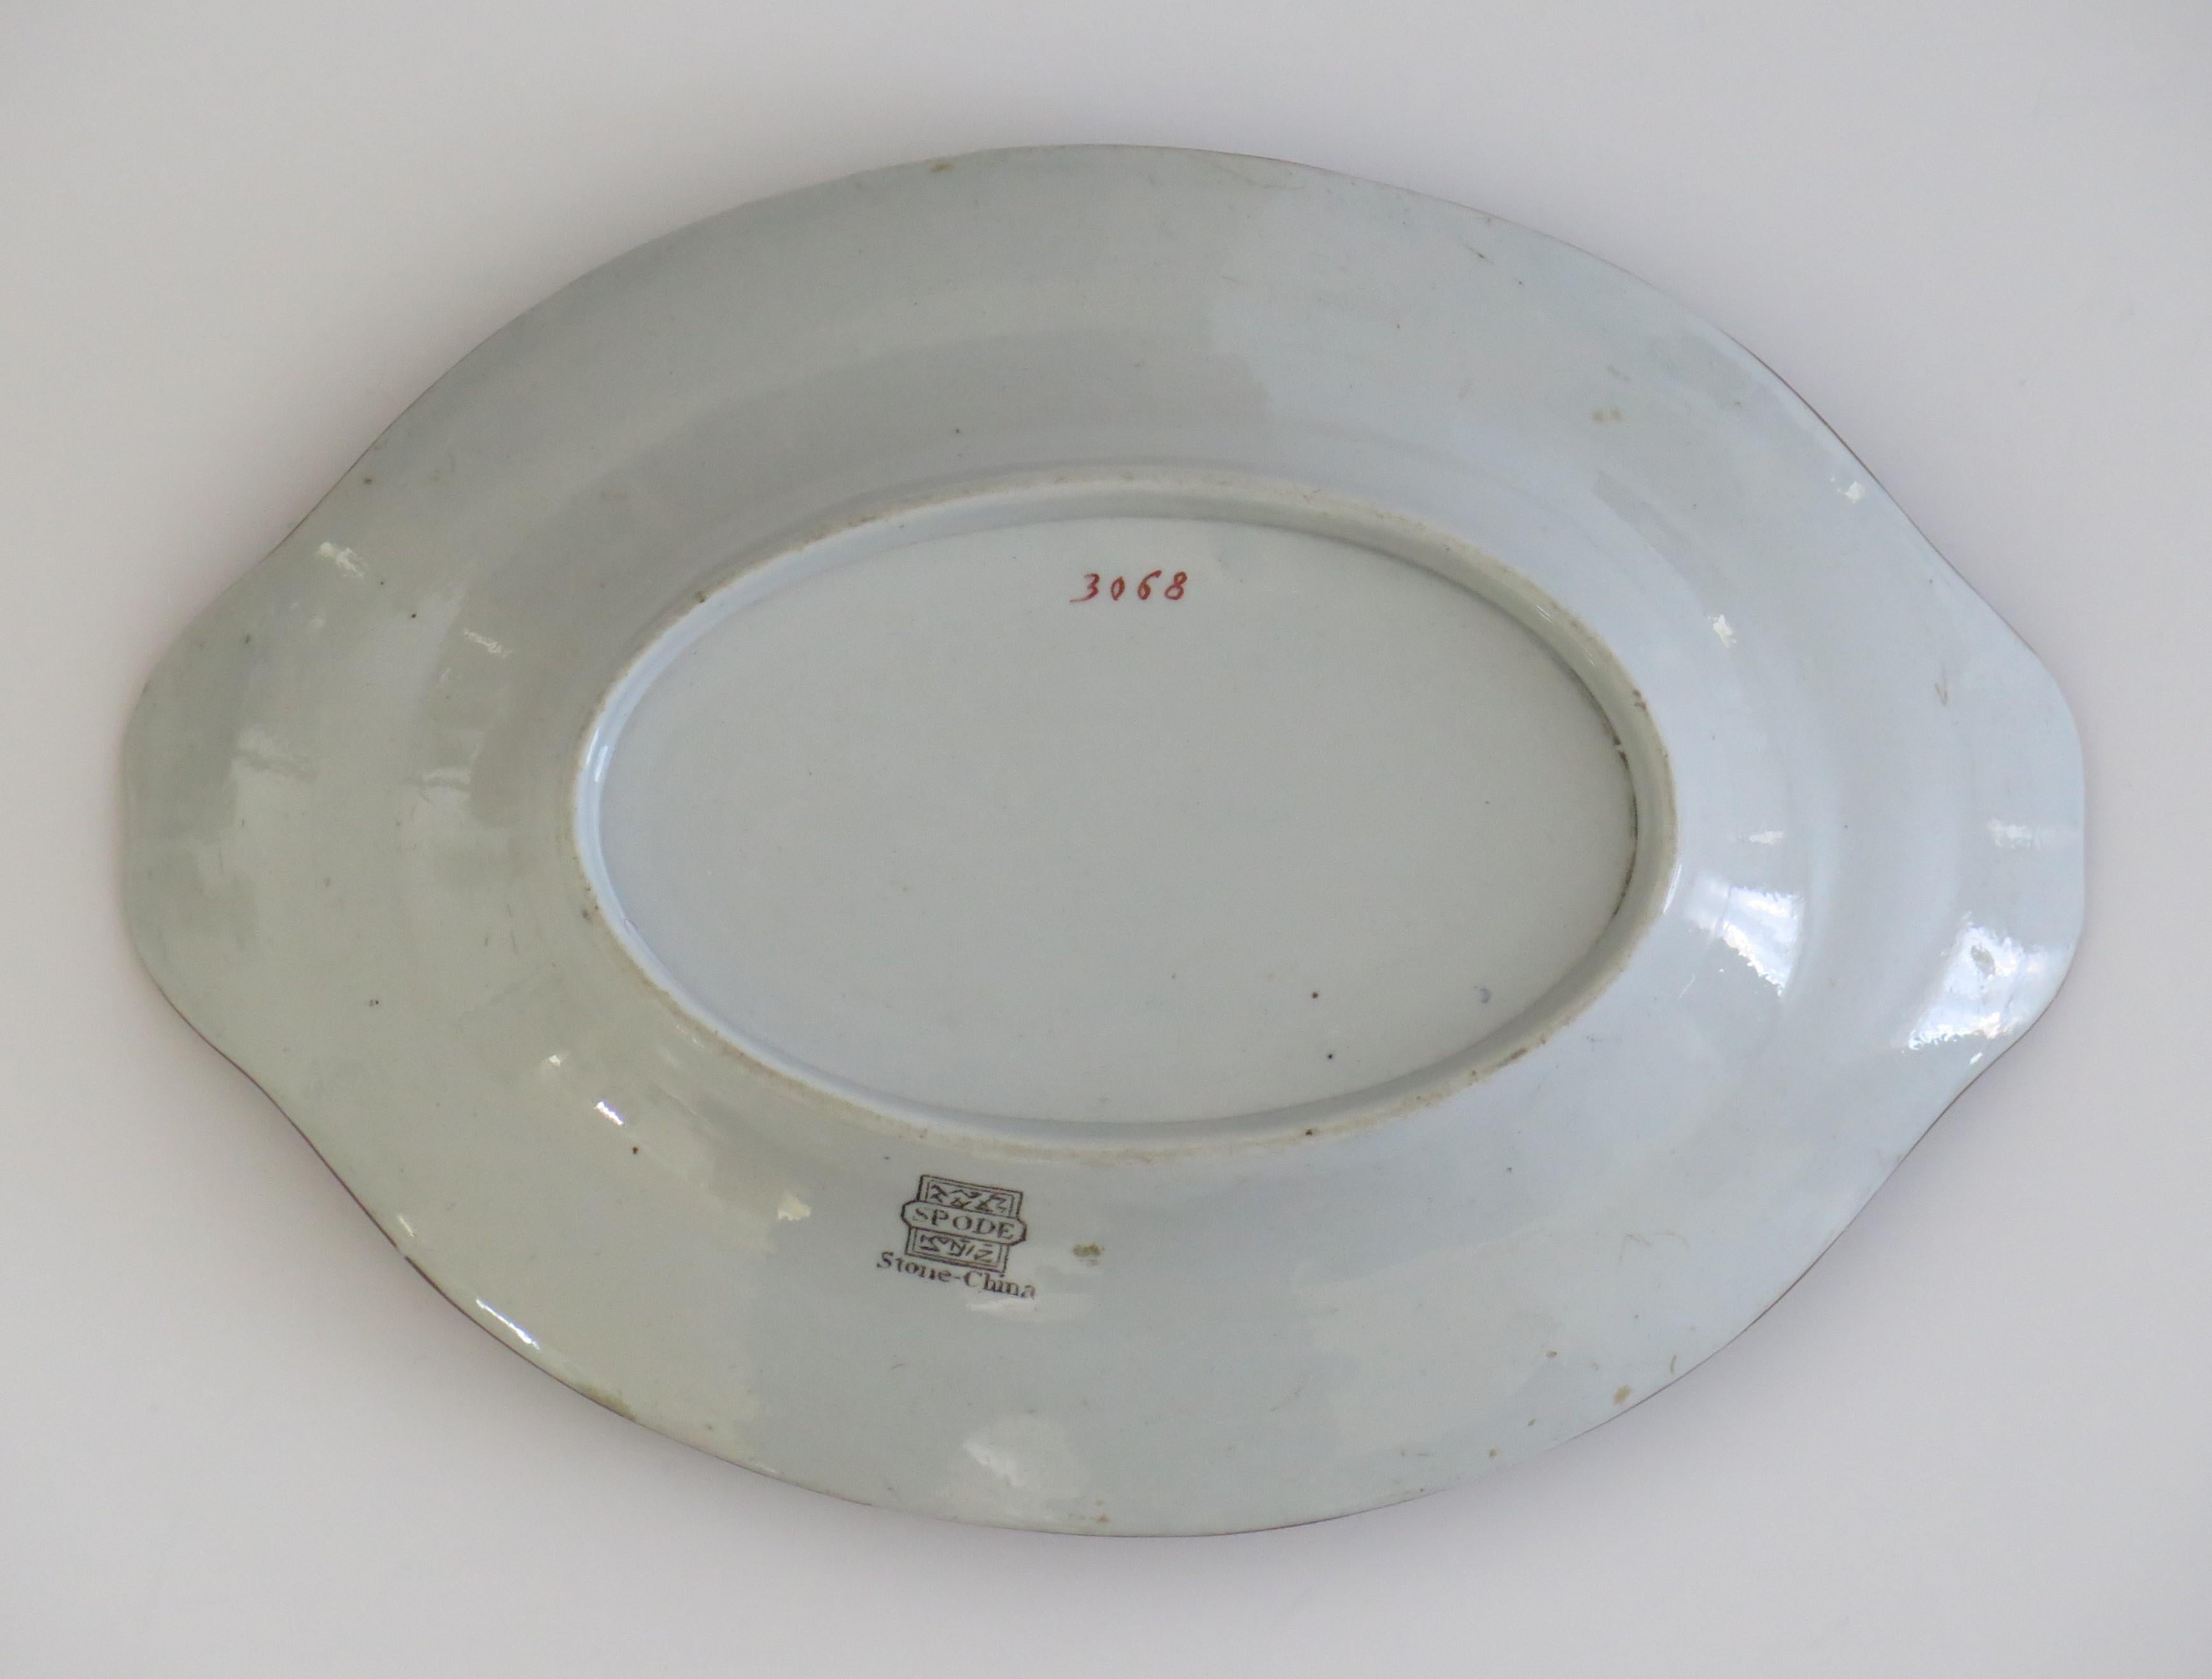 19th Century Spode Stone China Small Serving Dish in Ship Pattern 3068, circa 1810 For Sale